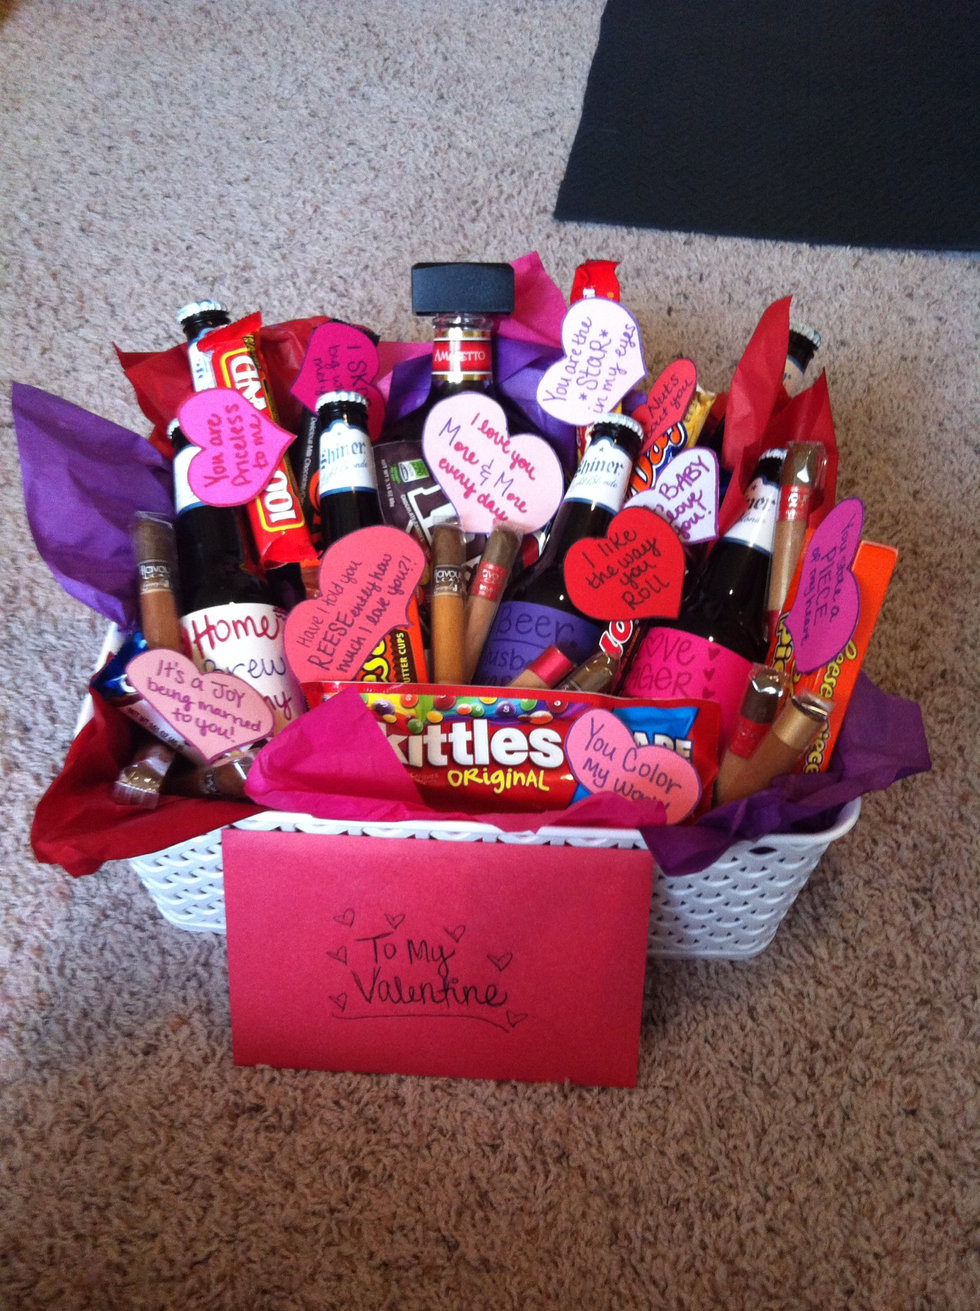 Homemade Gift Basket Ideas For Boyfriend
 6 Things You Should Be Getting Your Boo Valentine s Day